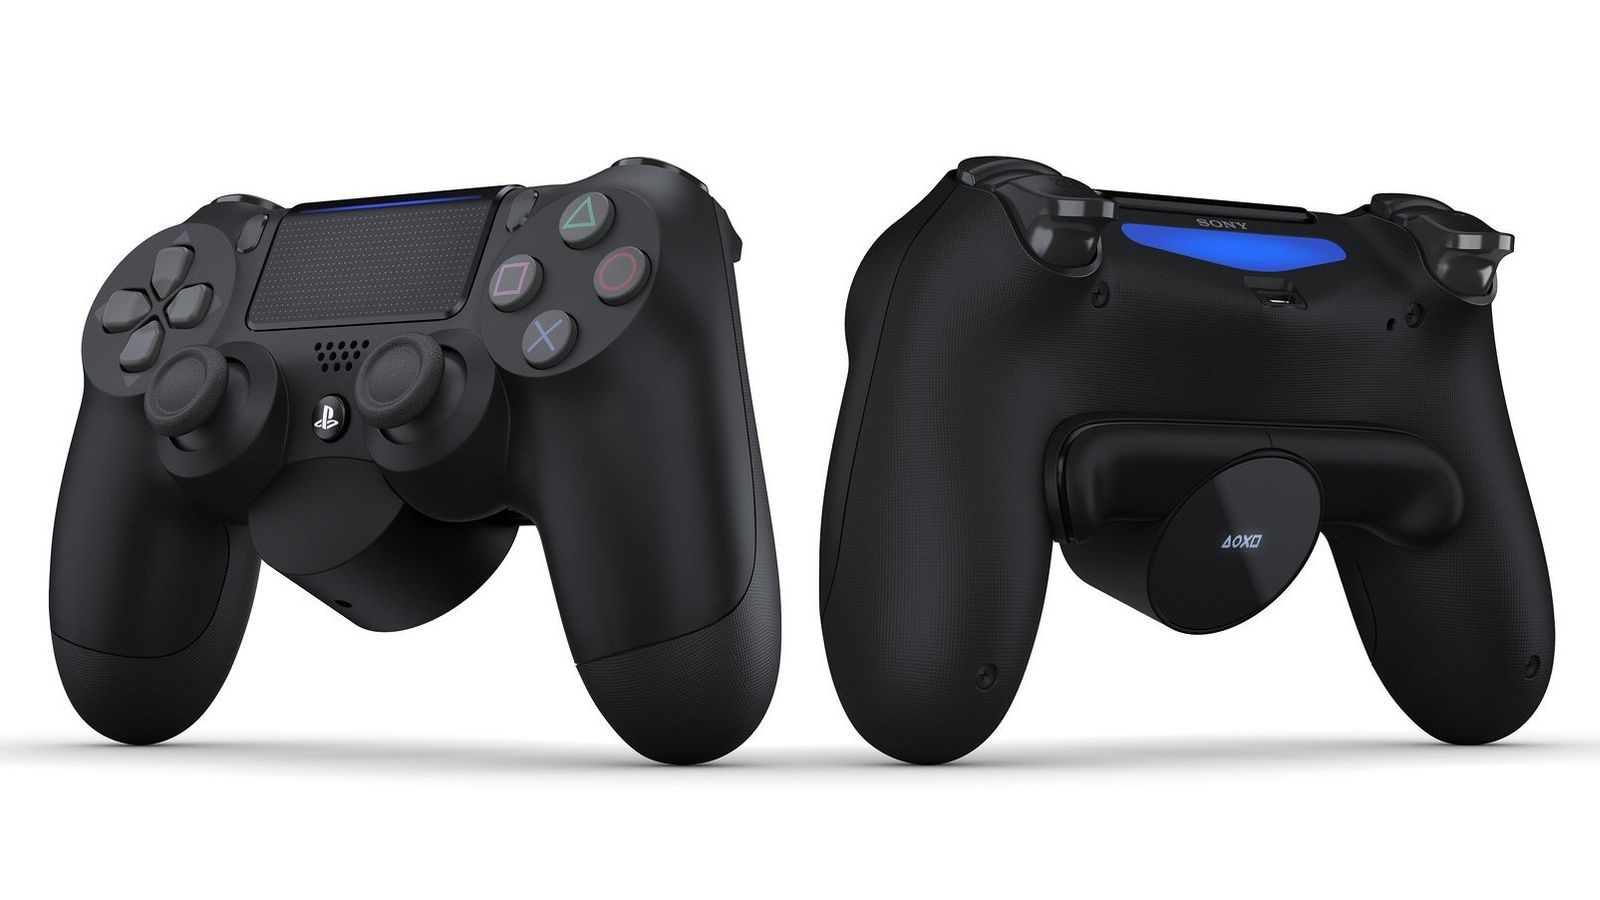 Rumor The PS5 Controller Will Be Backwards Compatible With The PS4 Console